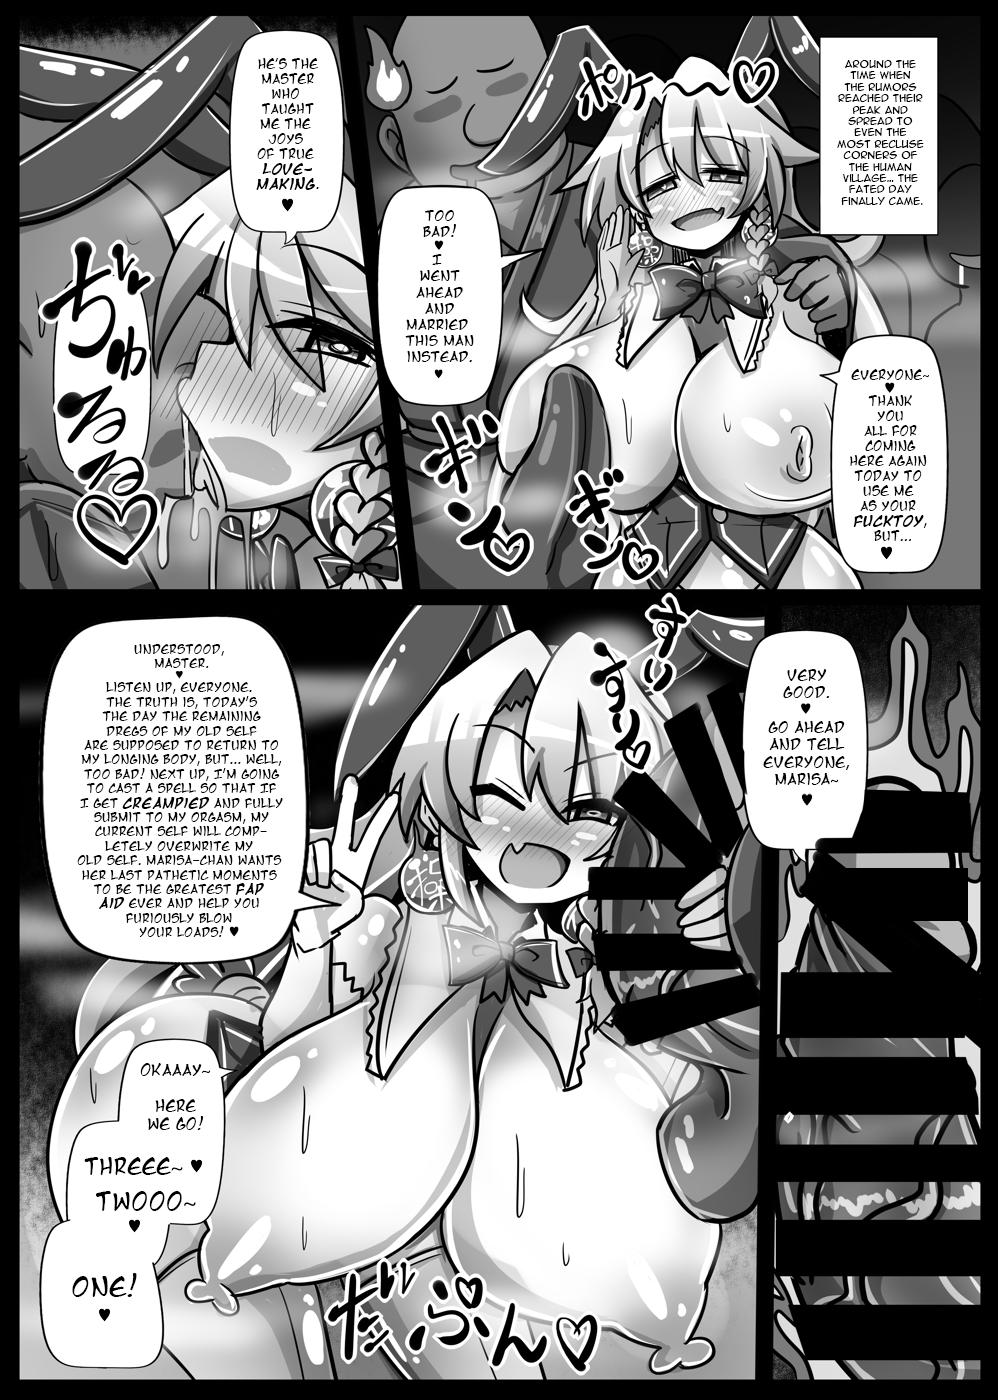 Vagina Paradise of Fake Lovers The Brainwashing of Young Maidens Story 2 - Touhou project Soft - Page 9